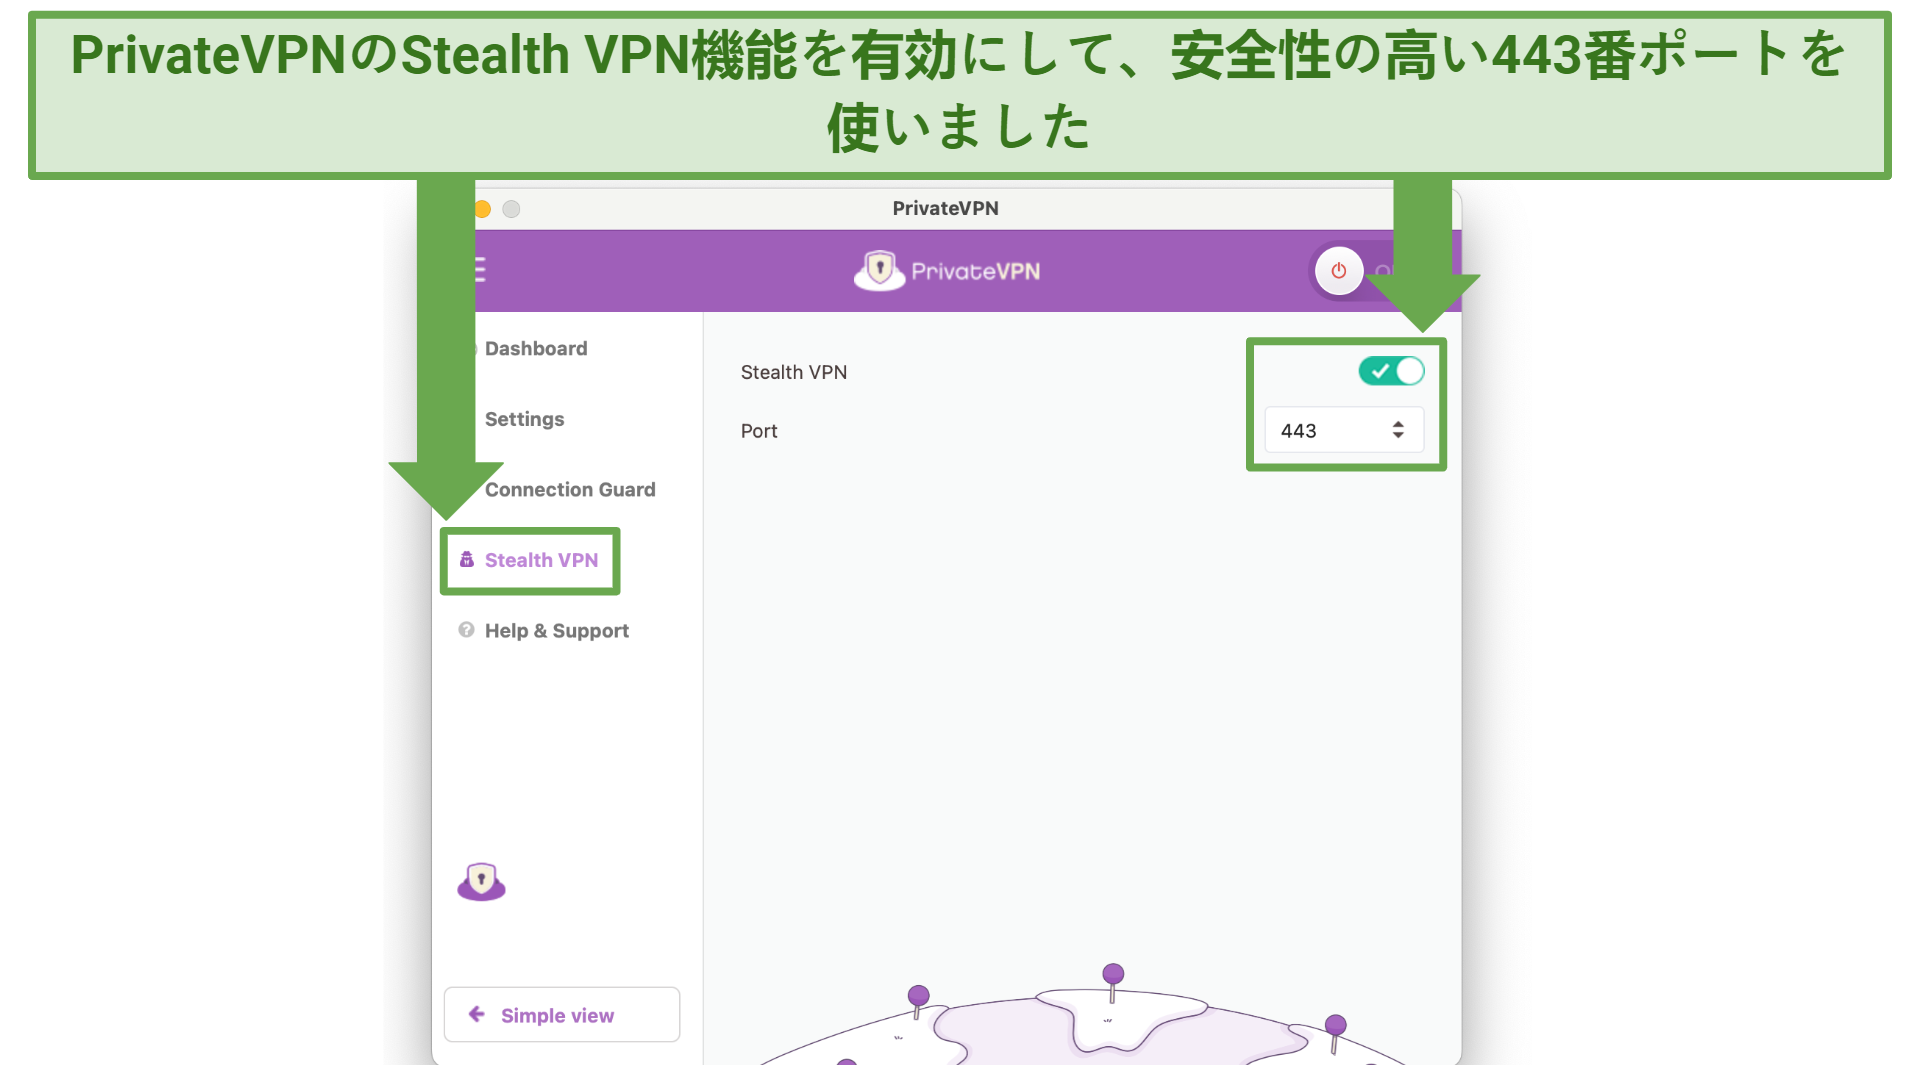 Screenshot showing the Advanced View of the PrivateVPN app activating Stealth VPN